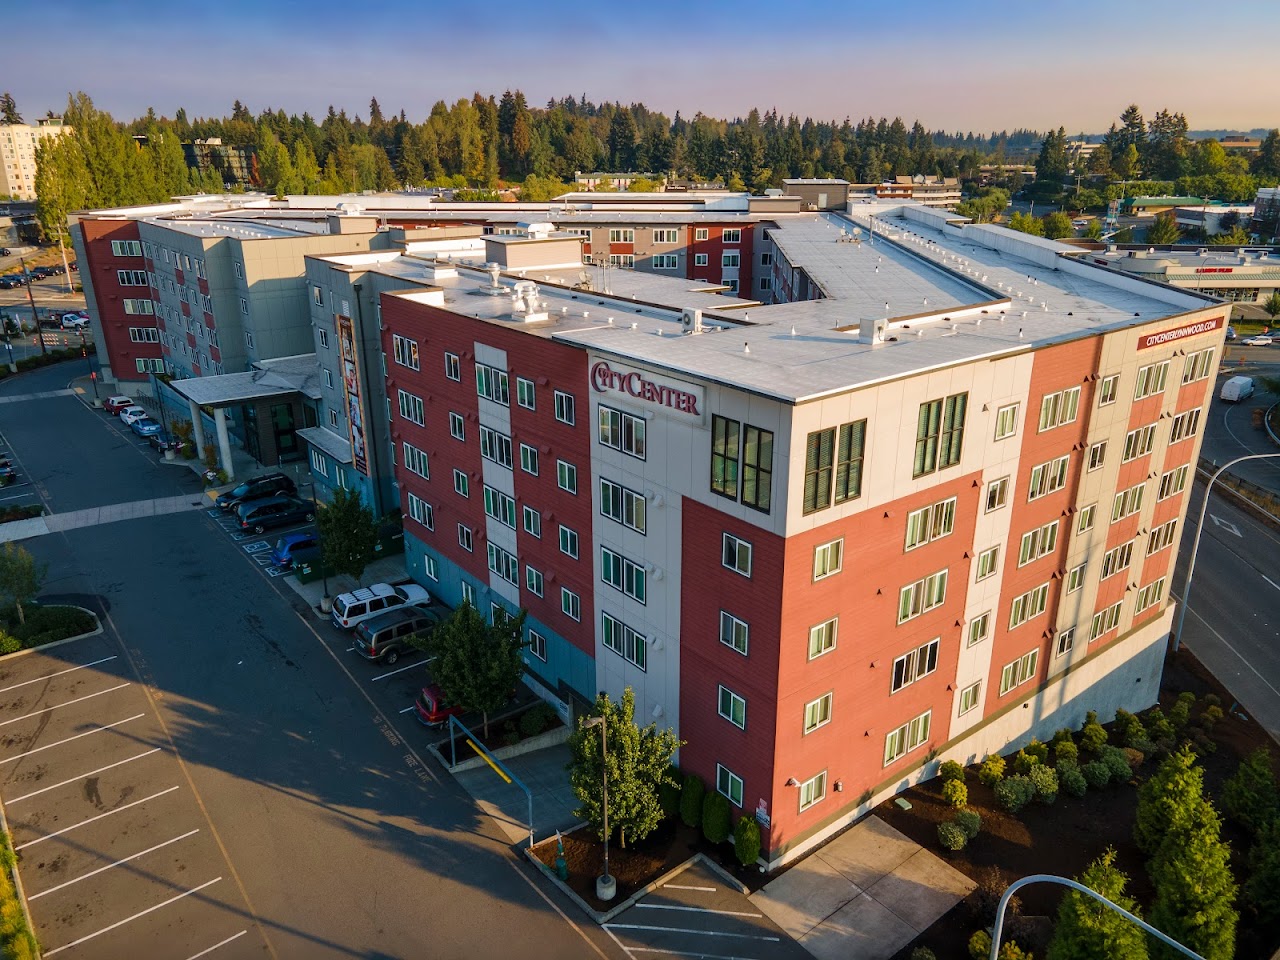 Photo of CITYCENTER APARTMENTS. Affordable housing located at 3720 196TH STREET SOUTHWEST LYNNWOOD, WA 98036